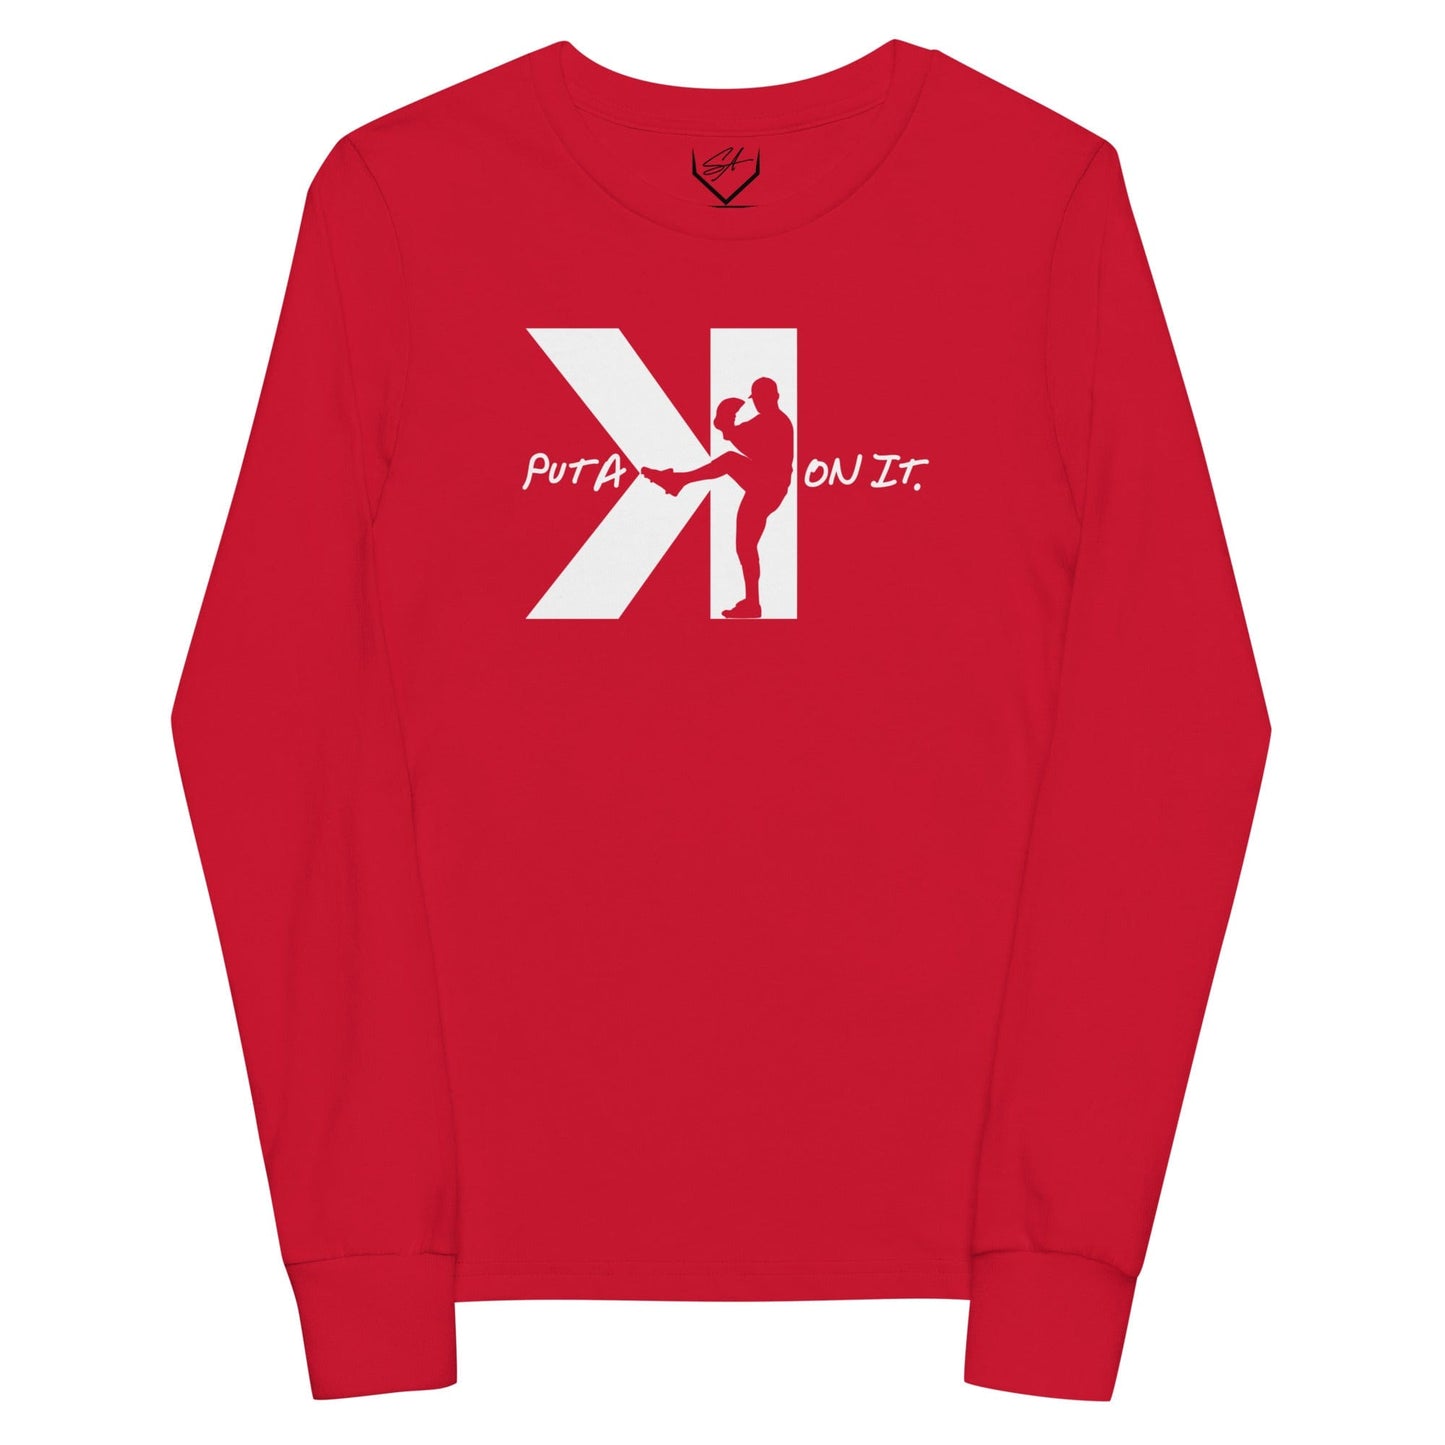 Put A K On It - Youth Long Sleeve